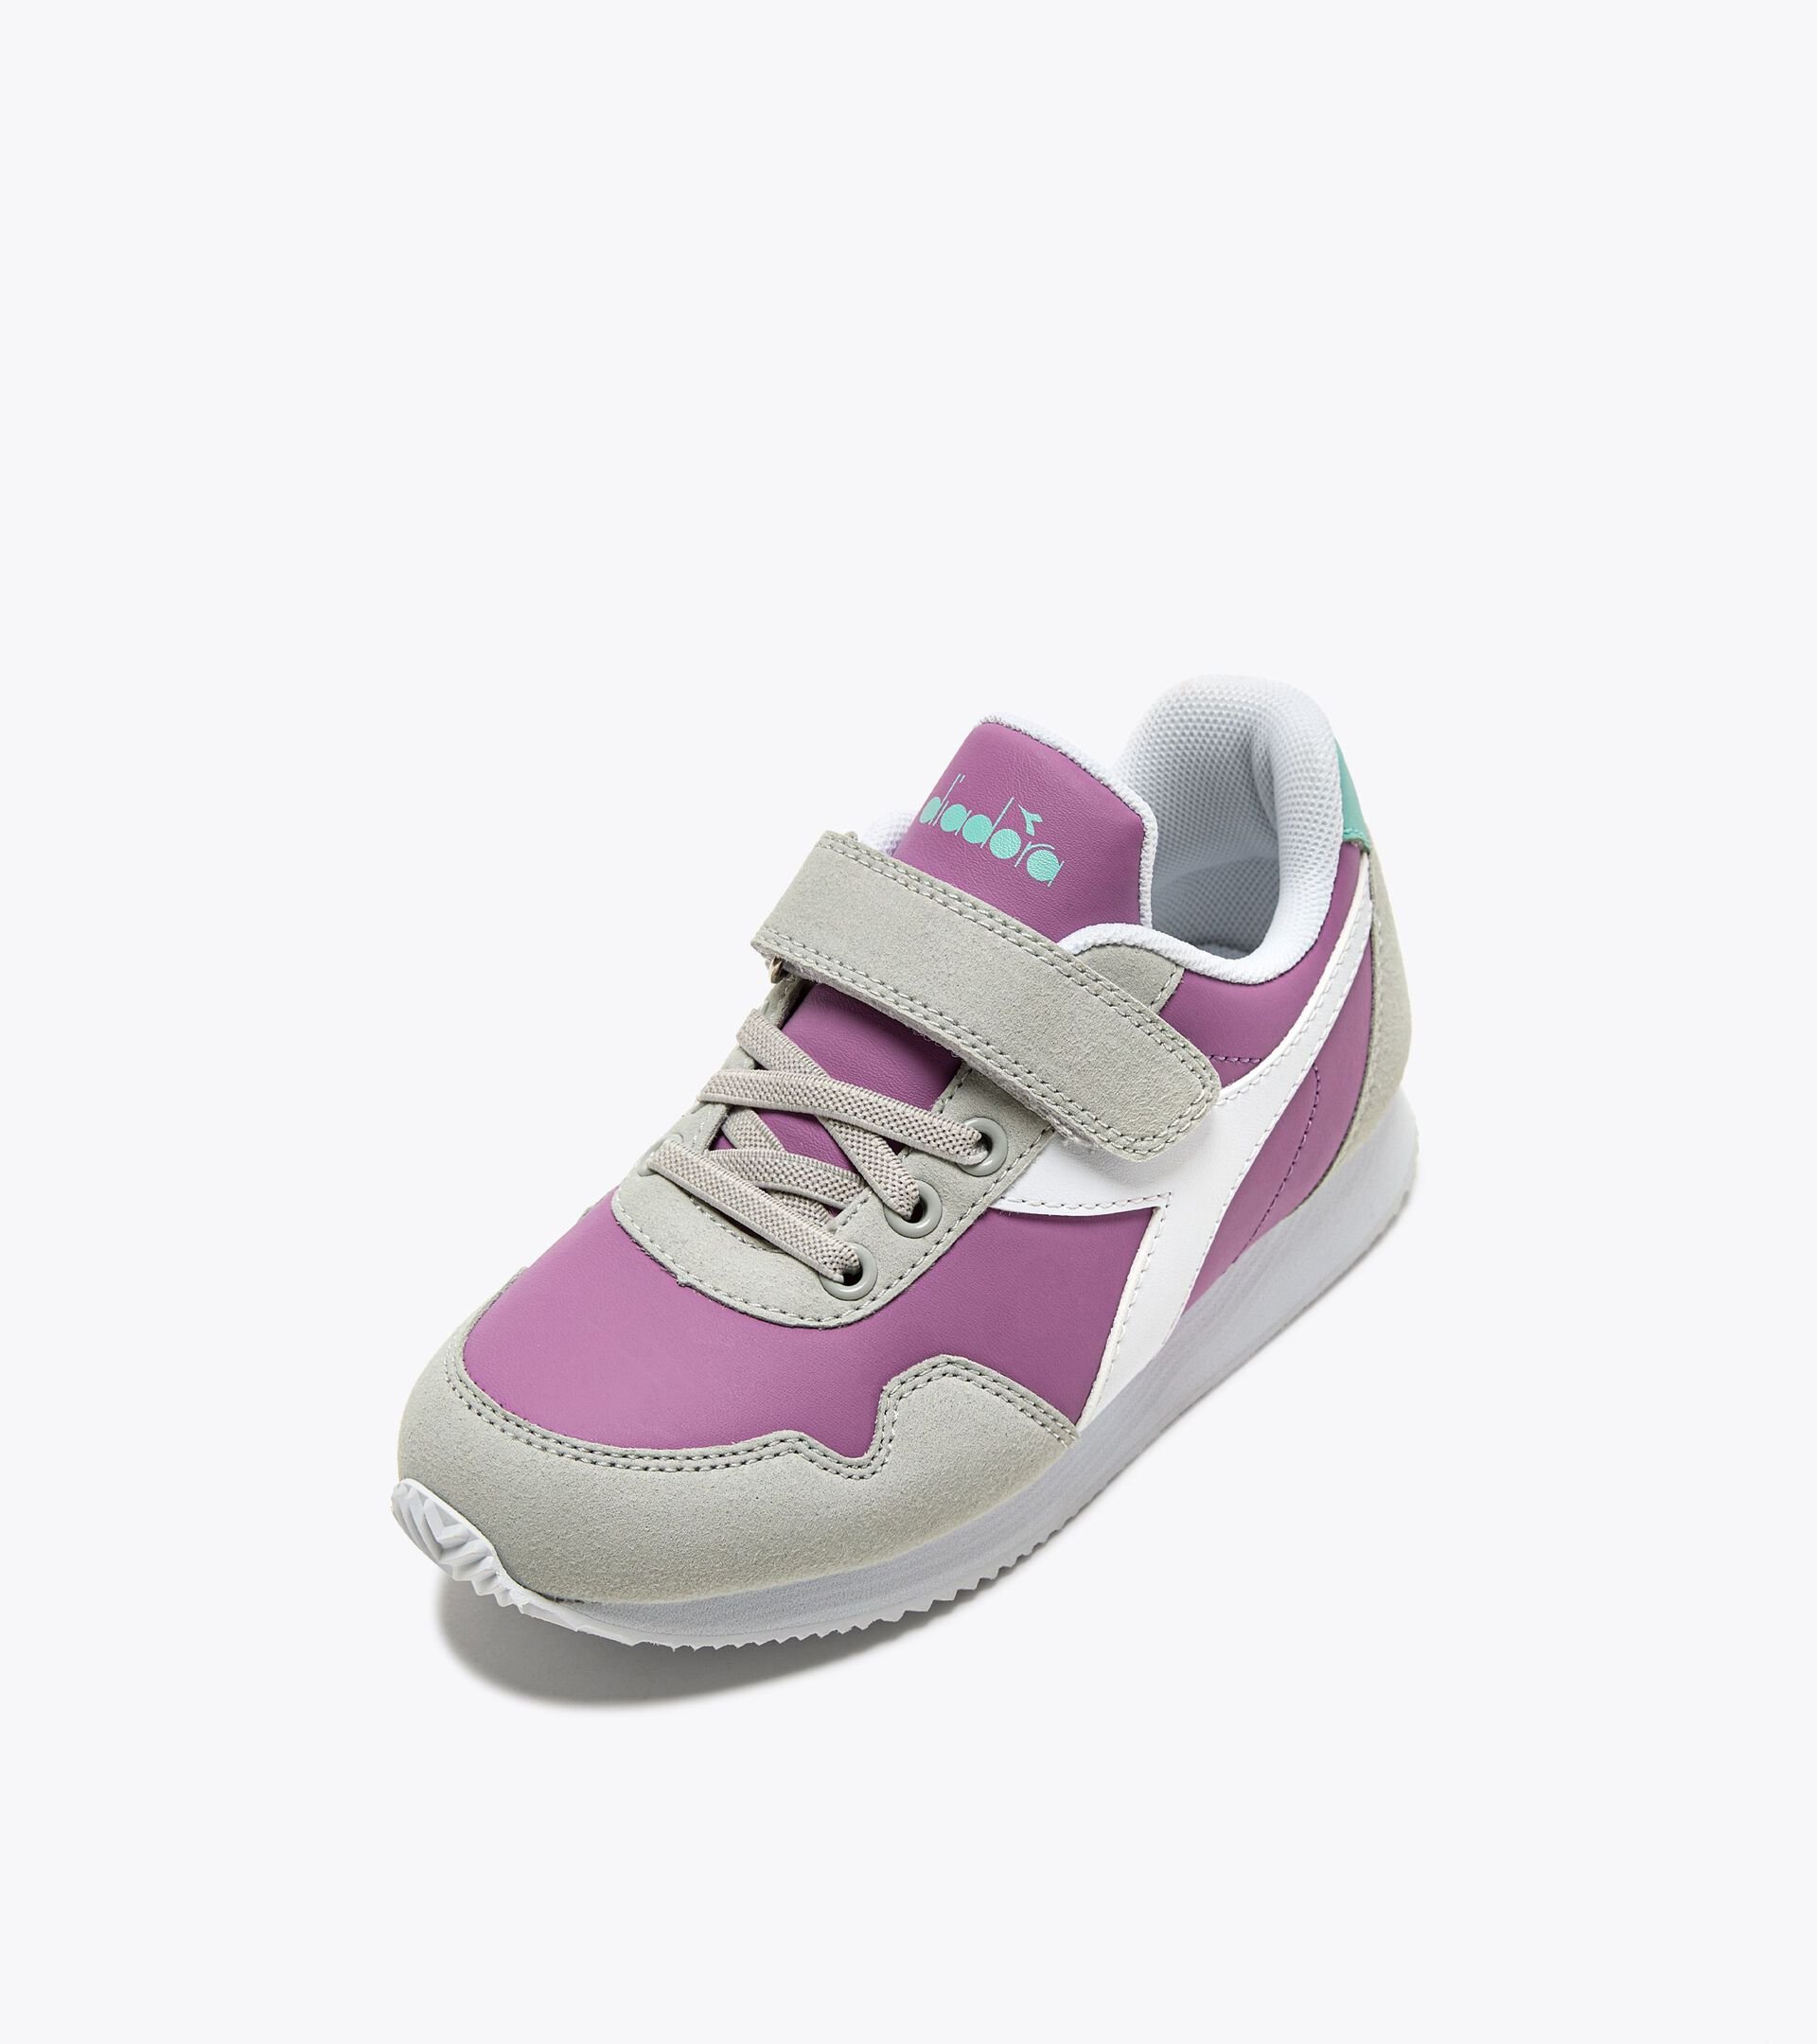 Sports shoes - Kids 4-8 years SIMPLE RUN PS MULBERRY/WHITE - Diadora